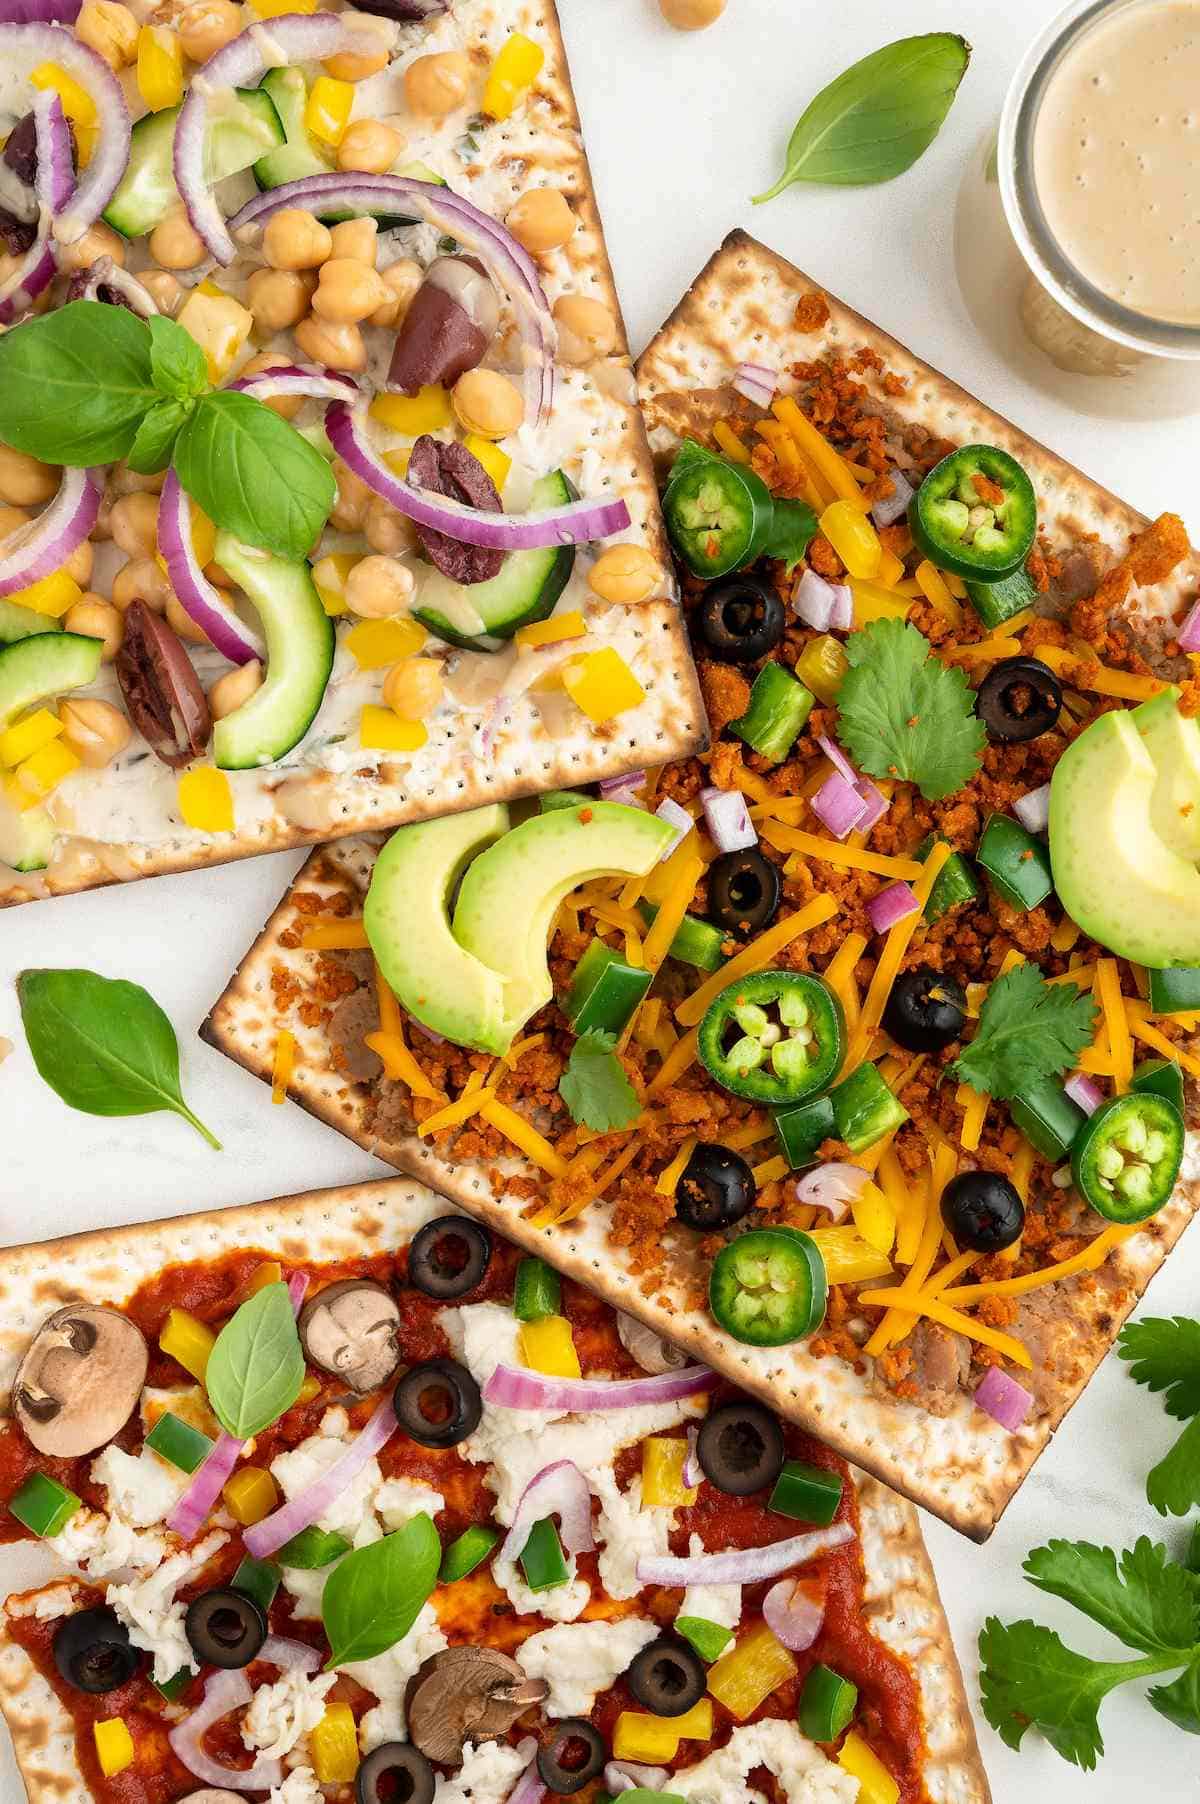 Vegan matzah pizza with different toppings.